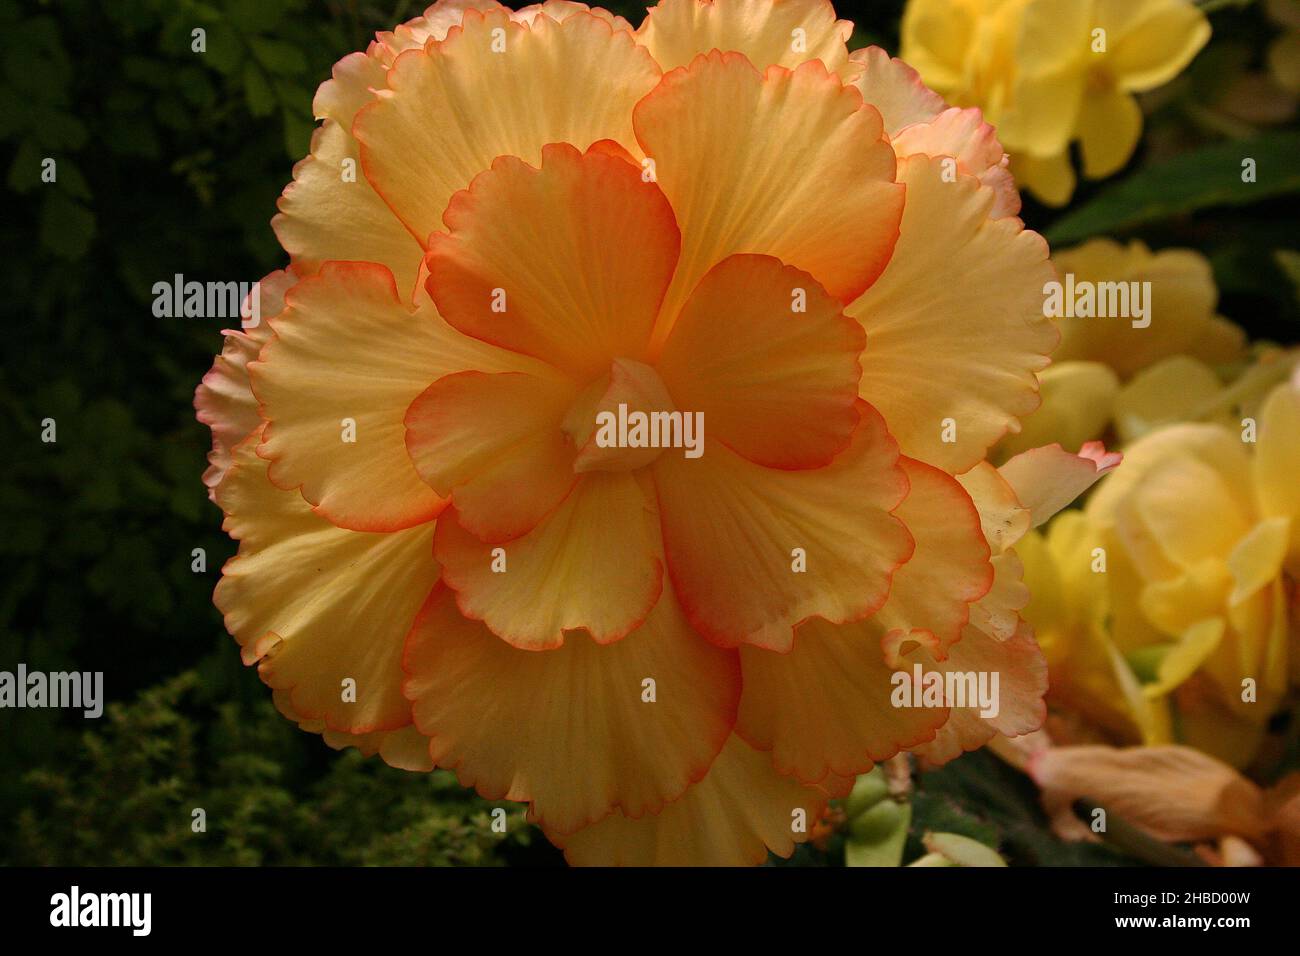 CLOSE-UP OF A BEAUTIFUL ORANGE AND YELLOW BEGONIA FLOWER. Stock Photo